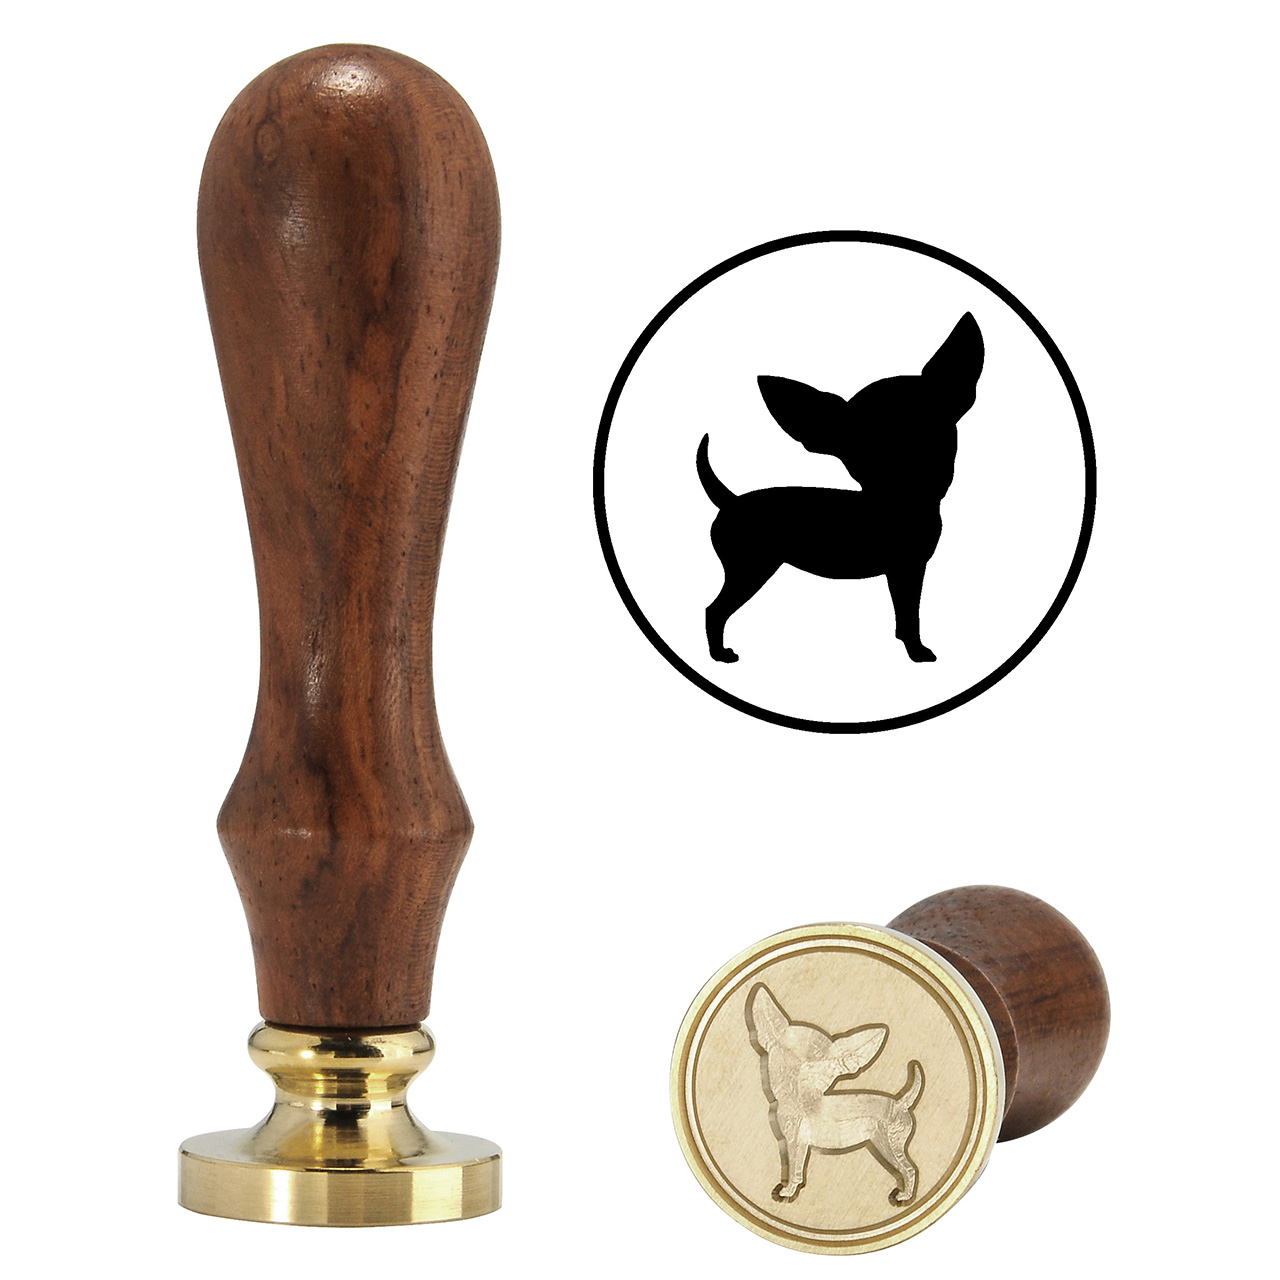 Lovely Dog Wax Stamp, Yoption Vintage Retro Lovely Dog Sealing Wax Seal Stamp, Great for Embellishment of Cards Envelopes, Invitations, Wine Packages, Gift Idea (Dog) 